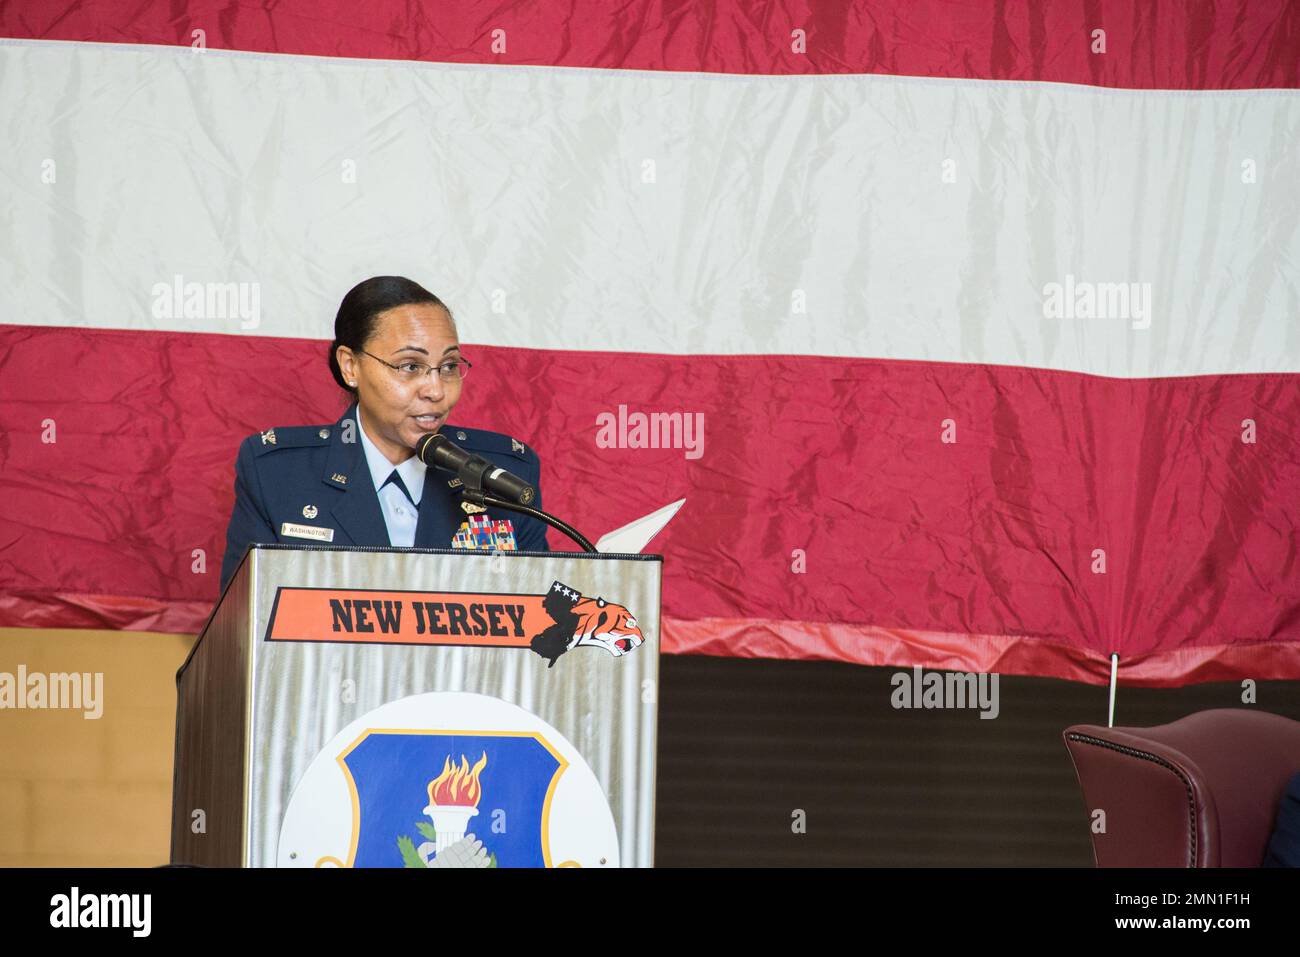 Col. Lola Washington gives her remarks during the 108th Mission Support Group change of command ceremony at Joint Base McGuire-Dix-Lakehurst, N.J., Sept. 24, 2022. Washington assumed command of the 108th MSG from Col. Bernadette Maldonado who served as commander since May 2021. Previously Washington served as the Chief of the Joint Staff for the New Jersey Air and Army National Guard in Lawrenceville, N.J. Stock Photo